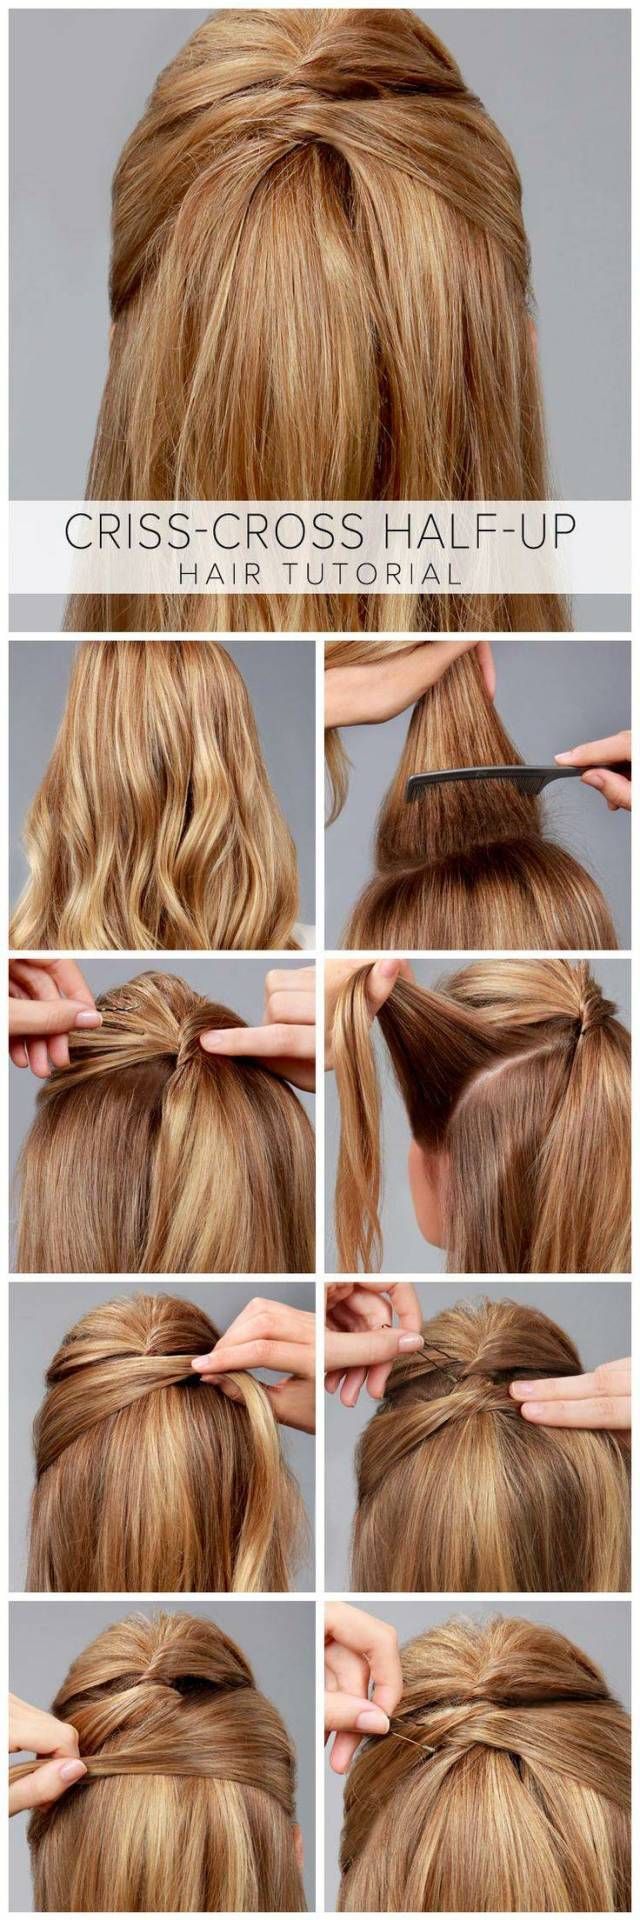 Criss cross half-up #hairstyle...